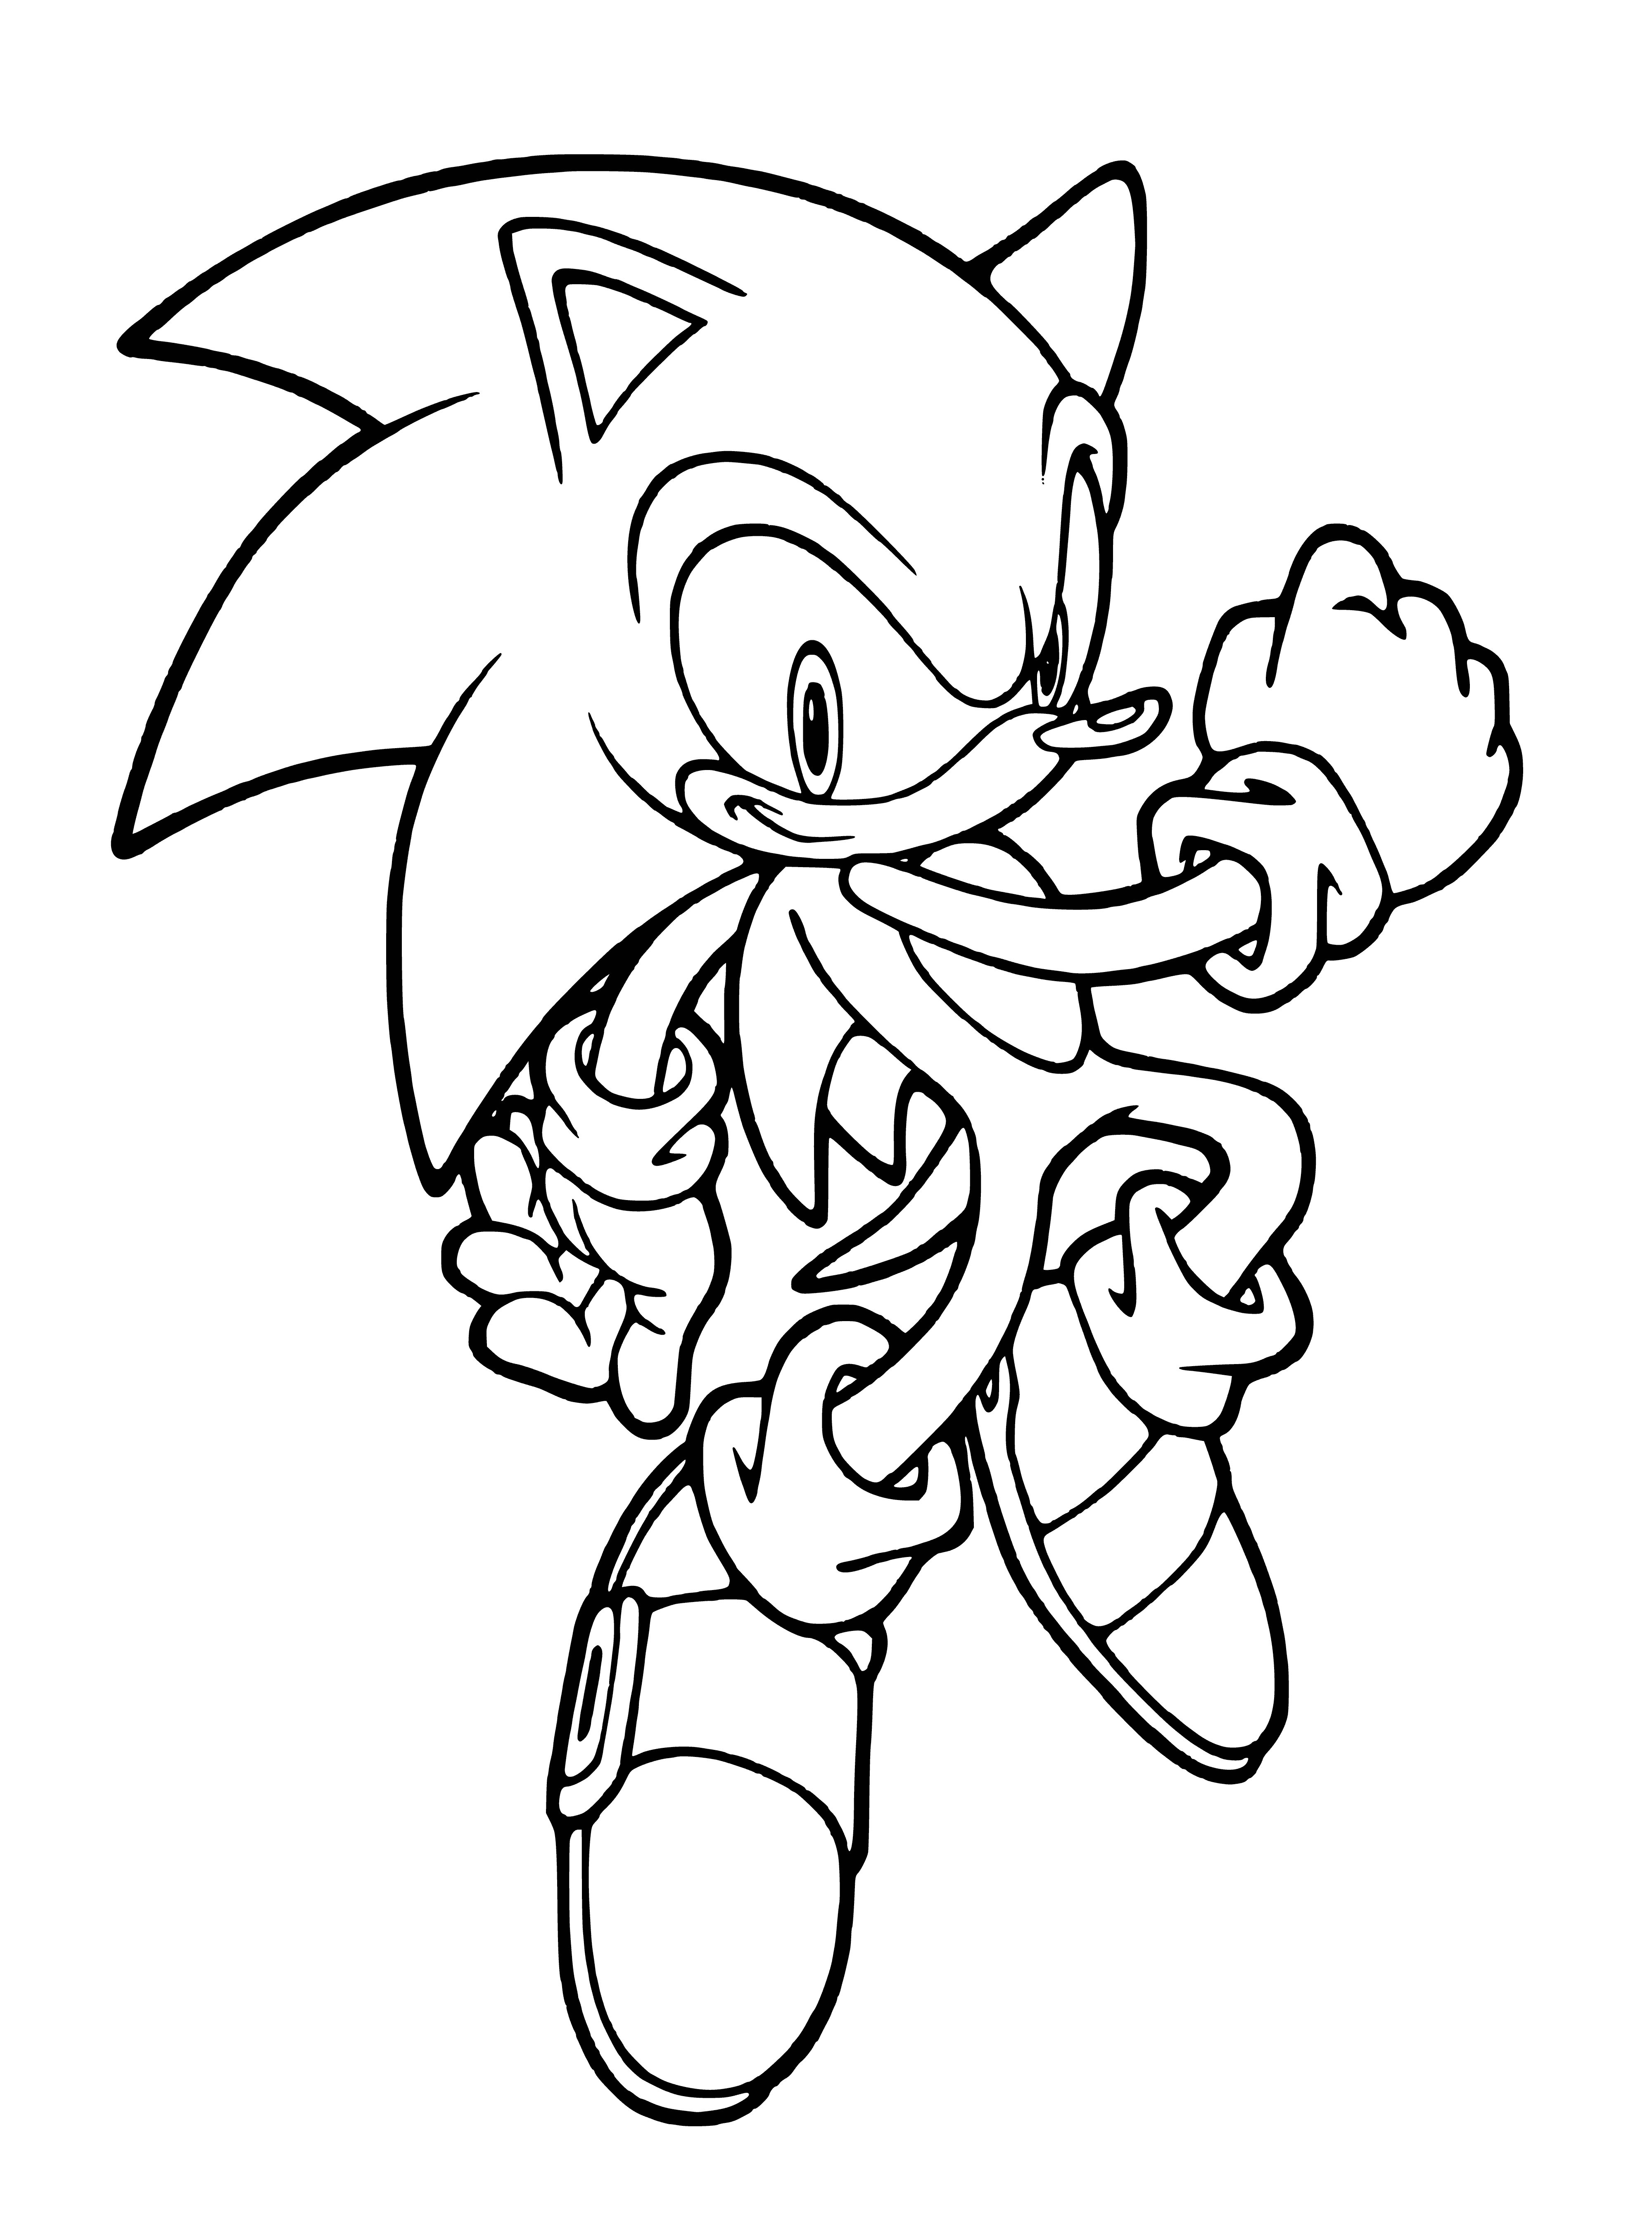 Sonic X coloring page